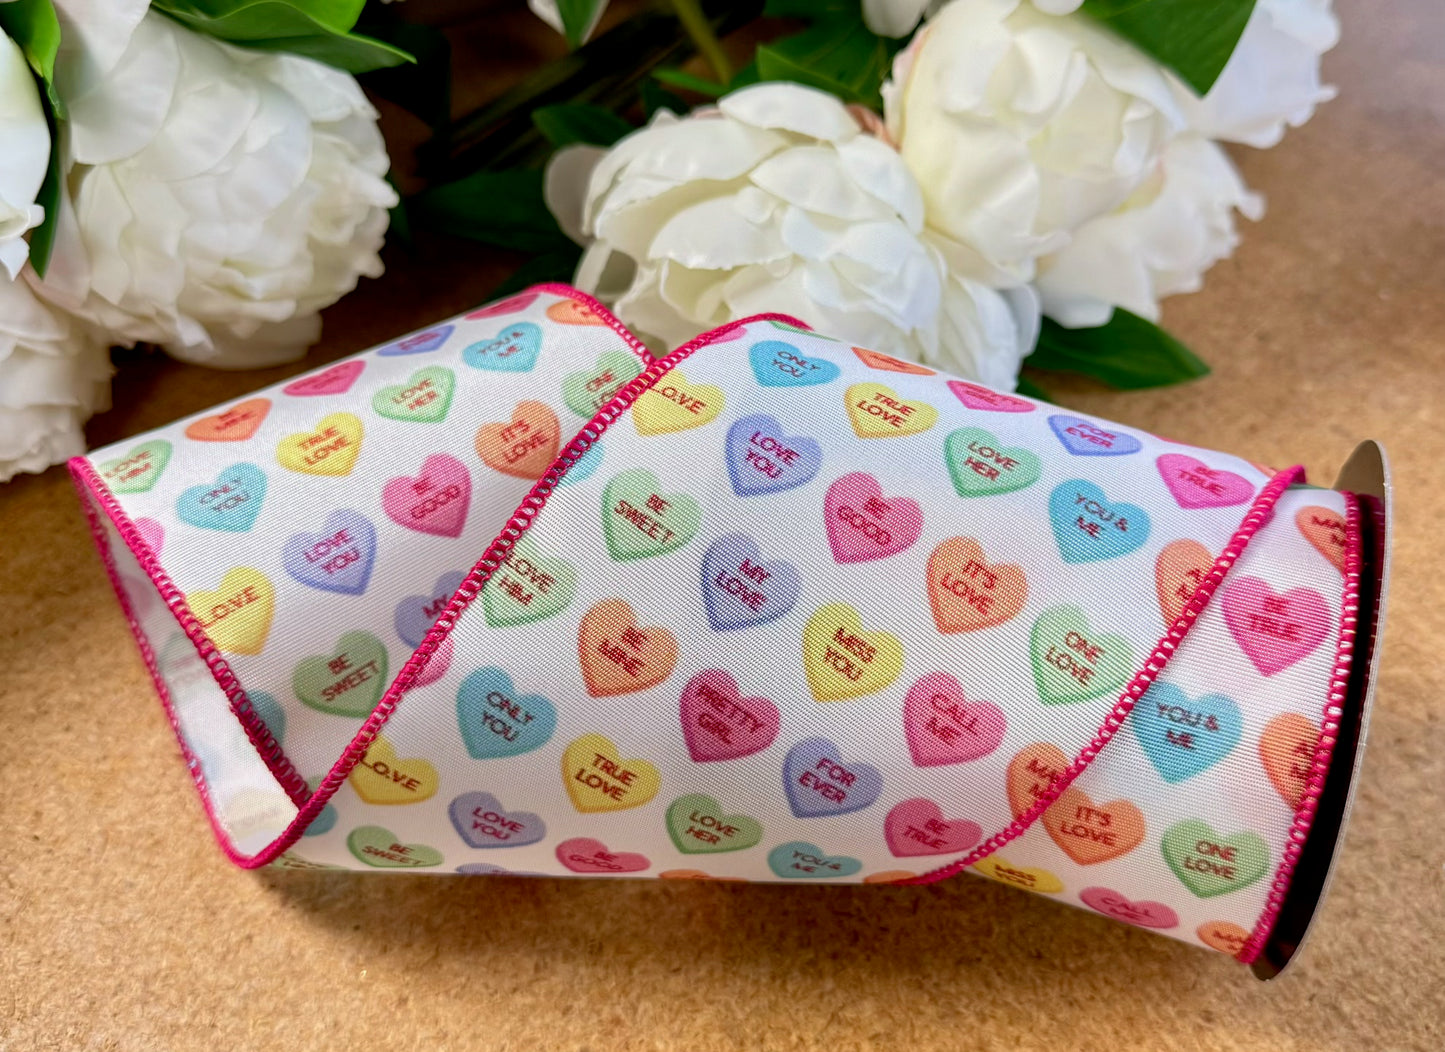 Conversation Heart Ribbon 4 Inches by 10 Yards